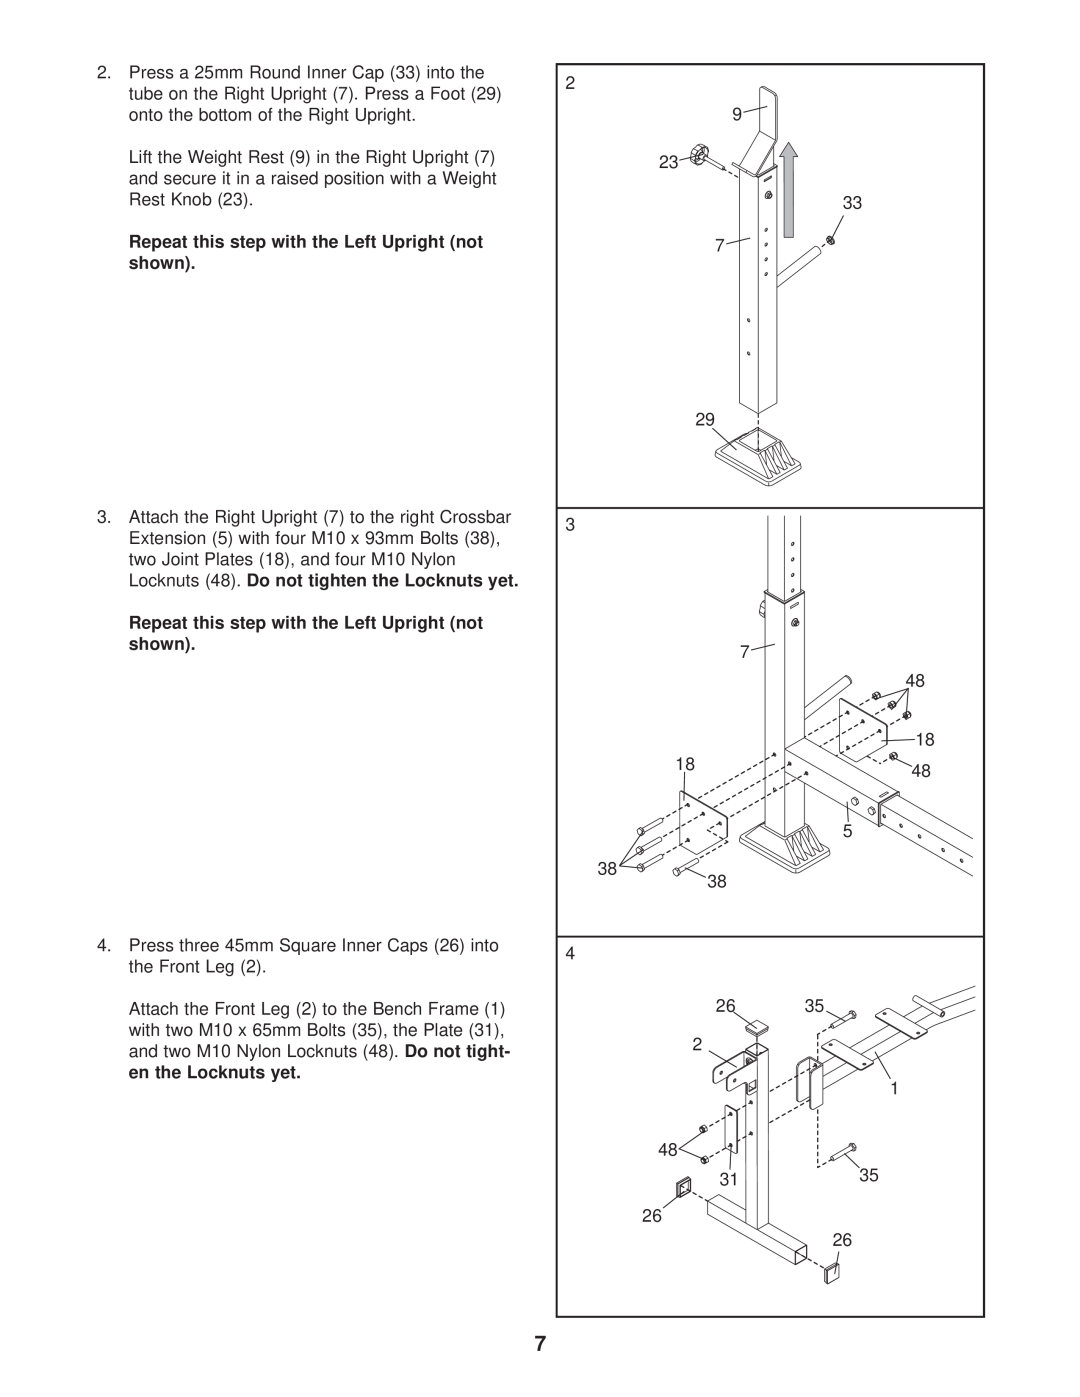 Weider 831.150310 user manual Repeat this step with the Left Upright not shown 